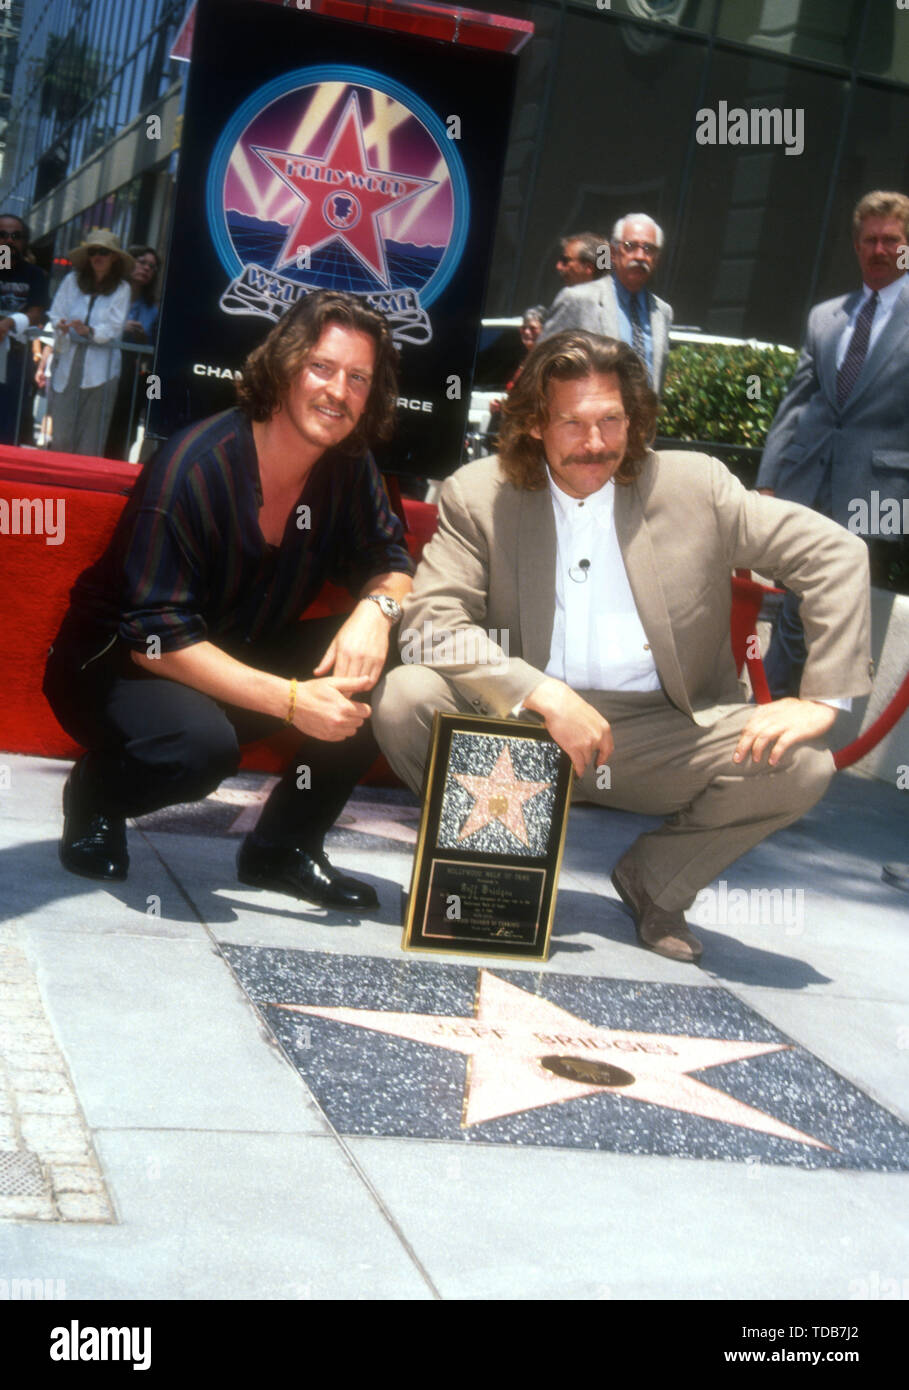 Hollywood, California, USA 11th July 1994 Director Stephen Hopkins and actor Jeff Bridges attend Jeff Bridges Receives a Star on the Hollywood Walk of Fame Ceremony on July 11, 1994 on Hollywood Boulevard in Hollywood, California, USA. Photo by Barry King/Alamy Stock Photo Stock Photo